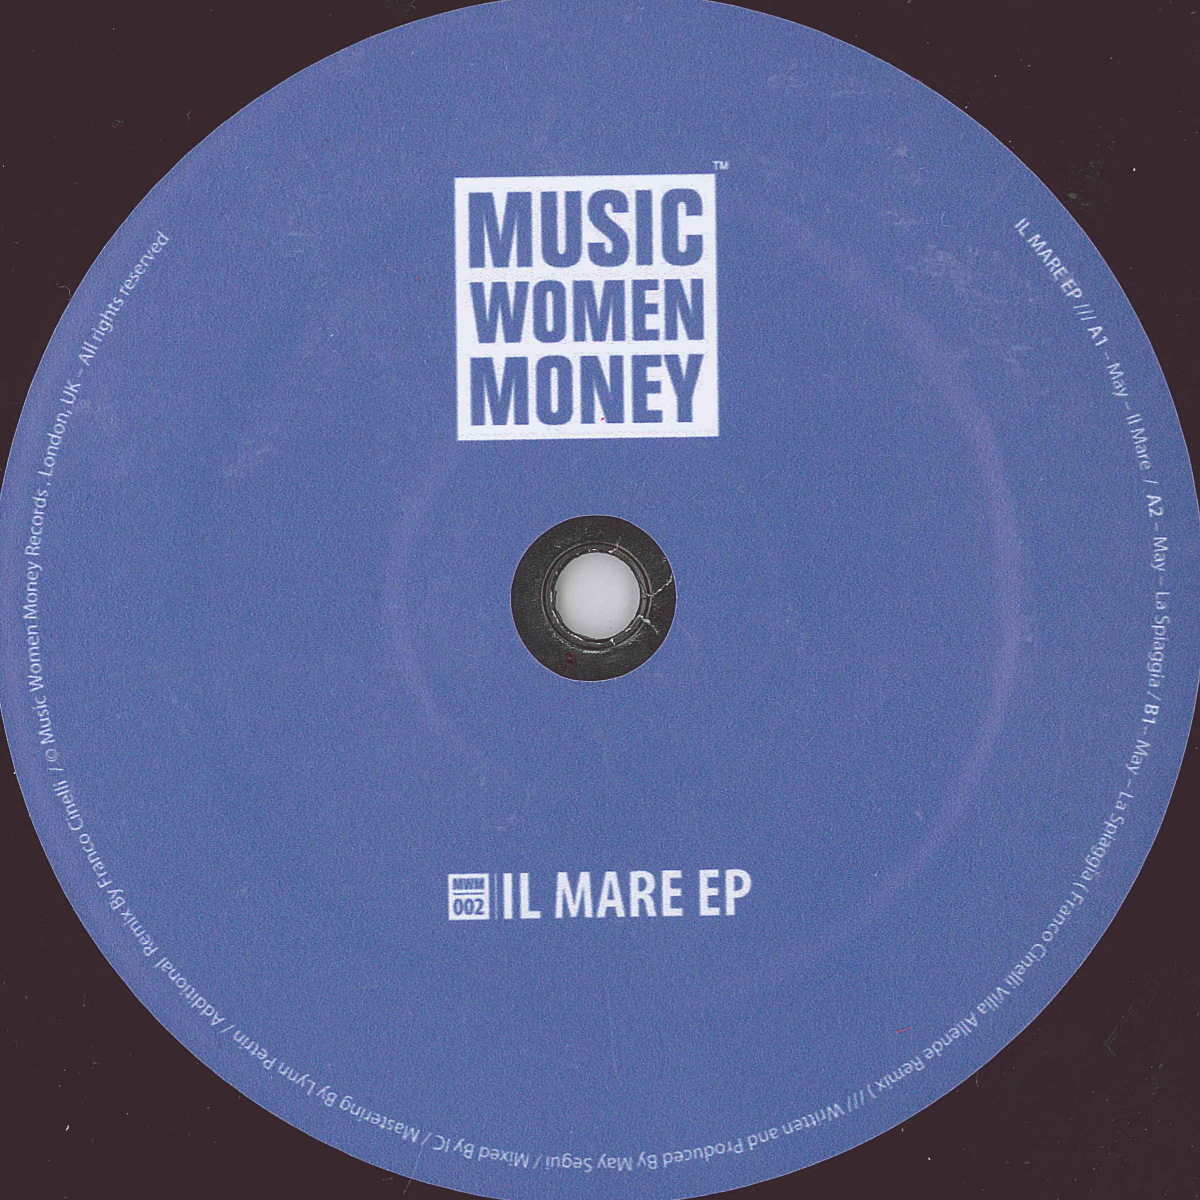 MAY – IL MARE (EP) Released on Music Women Money